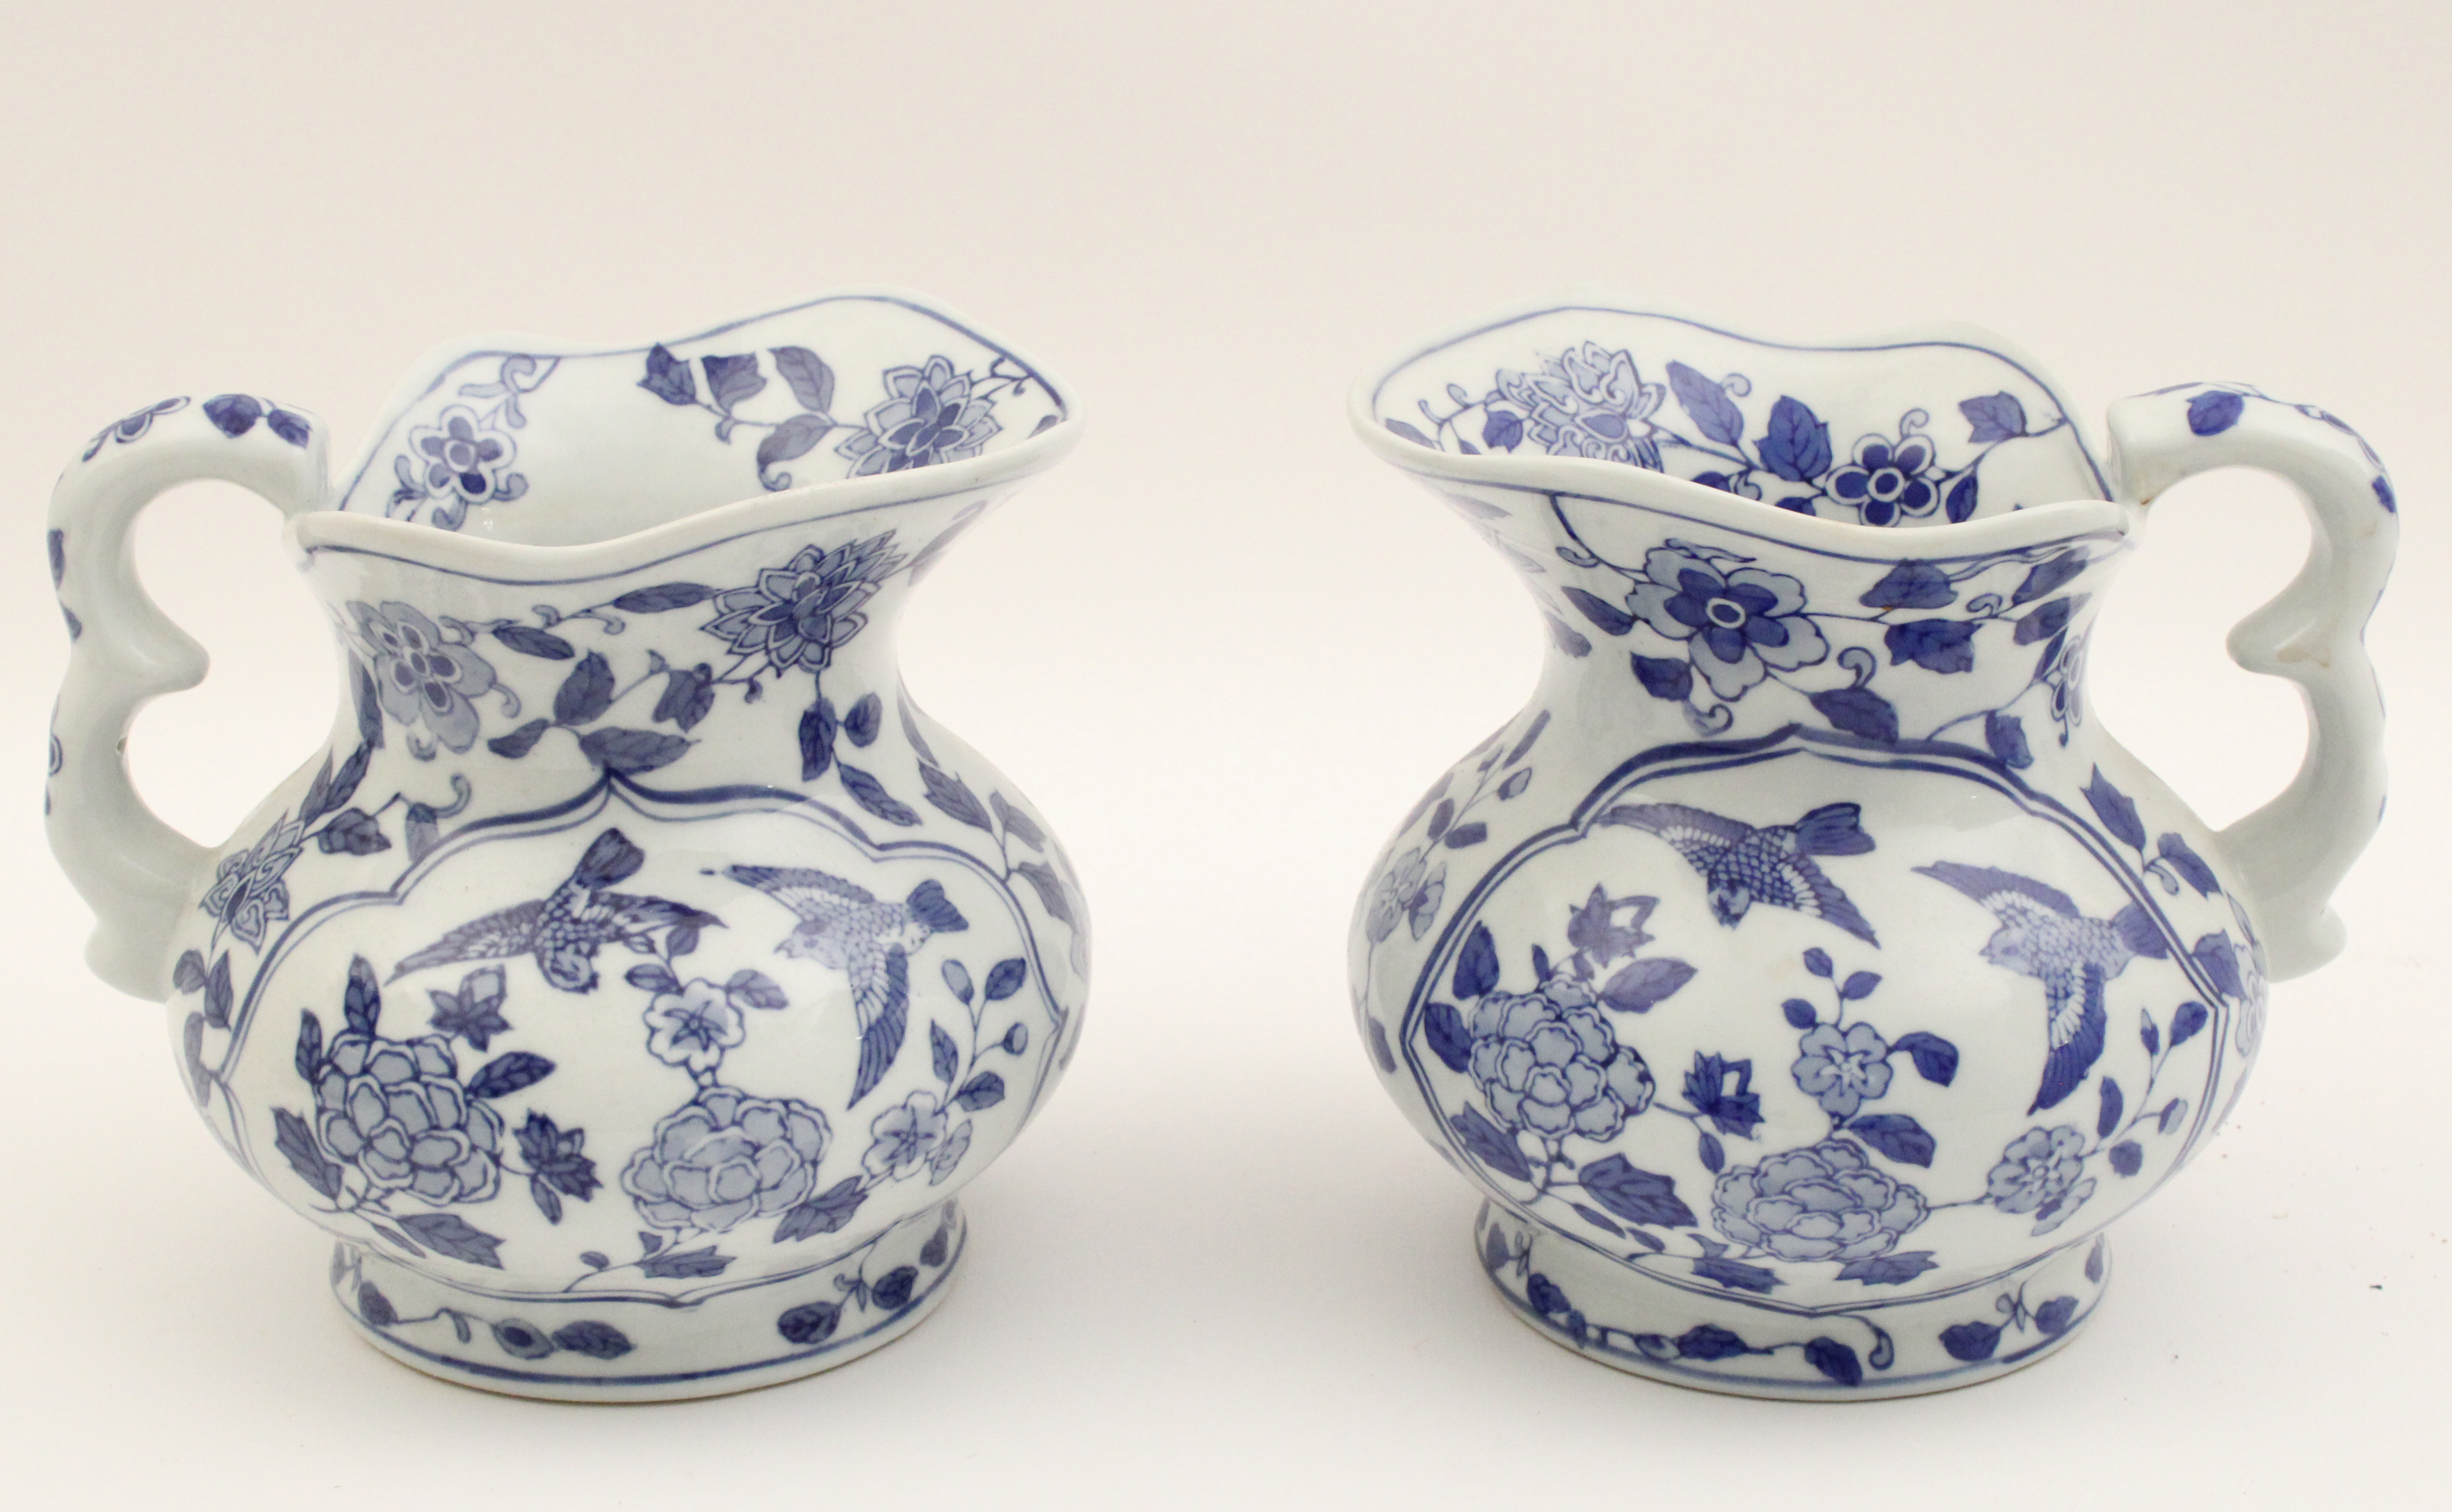 PAIR OF BLUE AND WHITE PORCELAIN 35f297